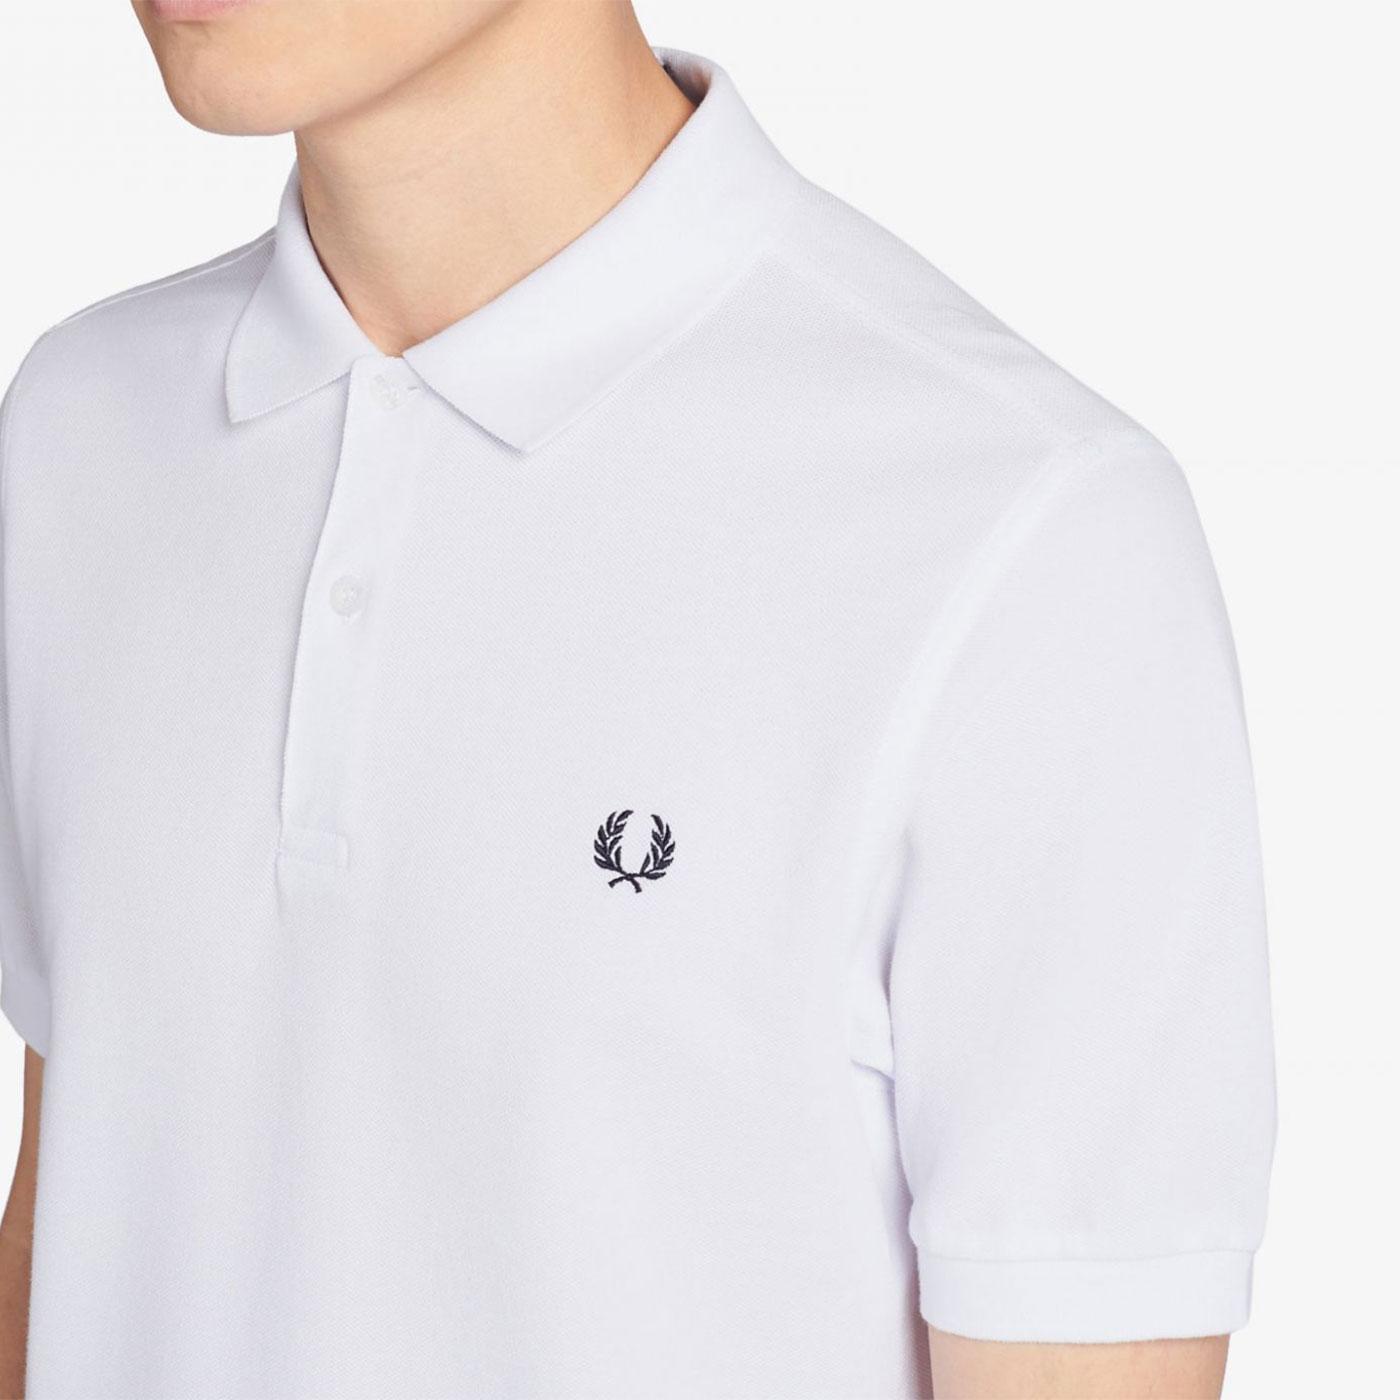 FRED PERRY Men's Retro Slim Fit Pique Polo Shirt in White